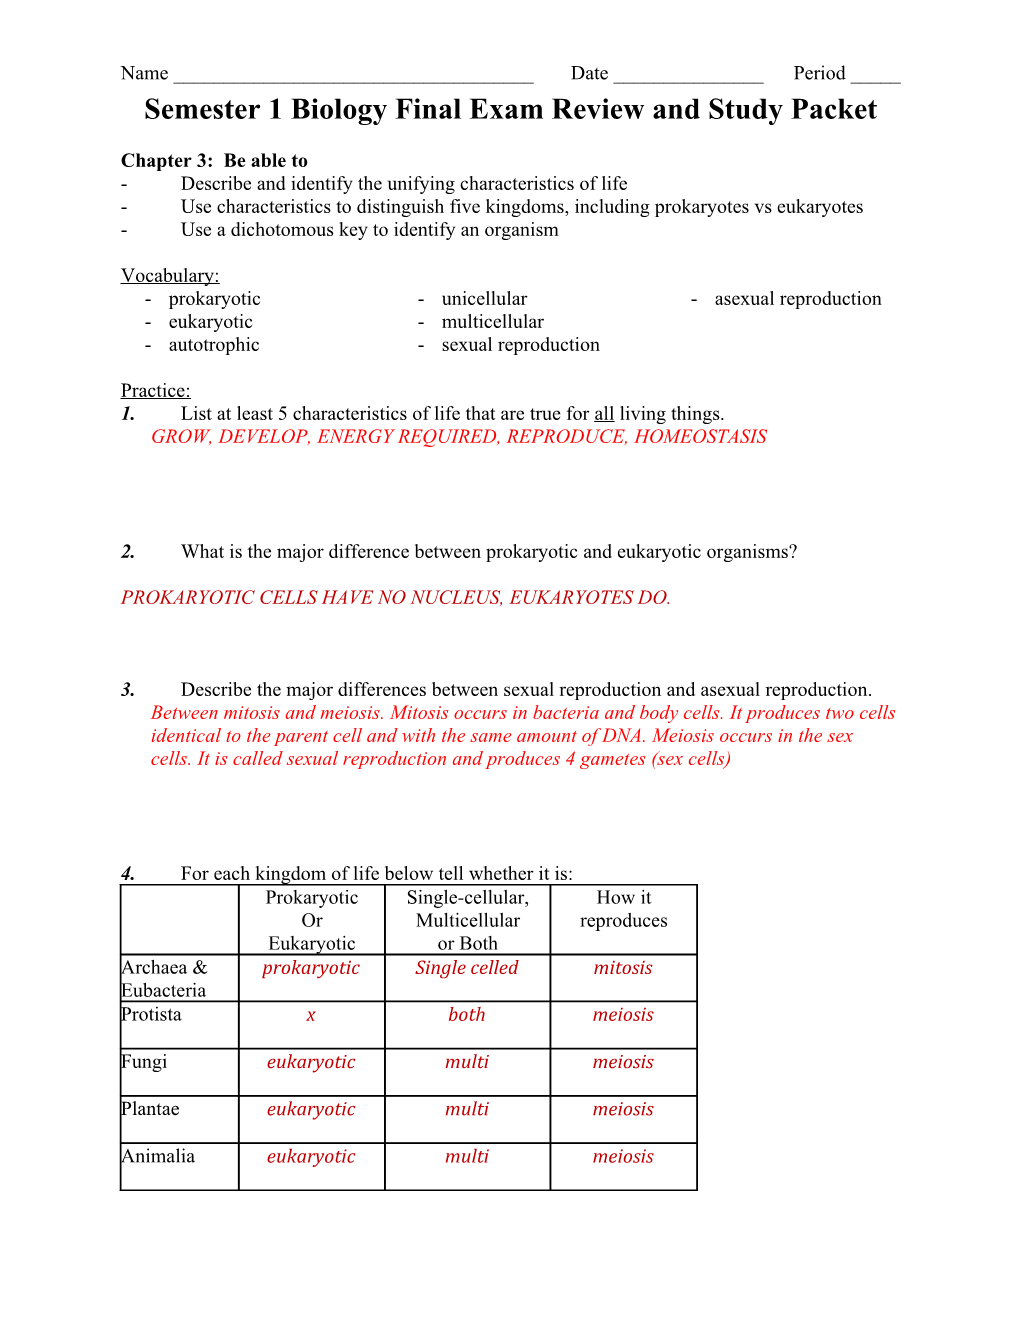 Semester 1 Biology Final Exam Review and Study Packet